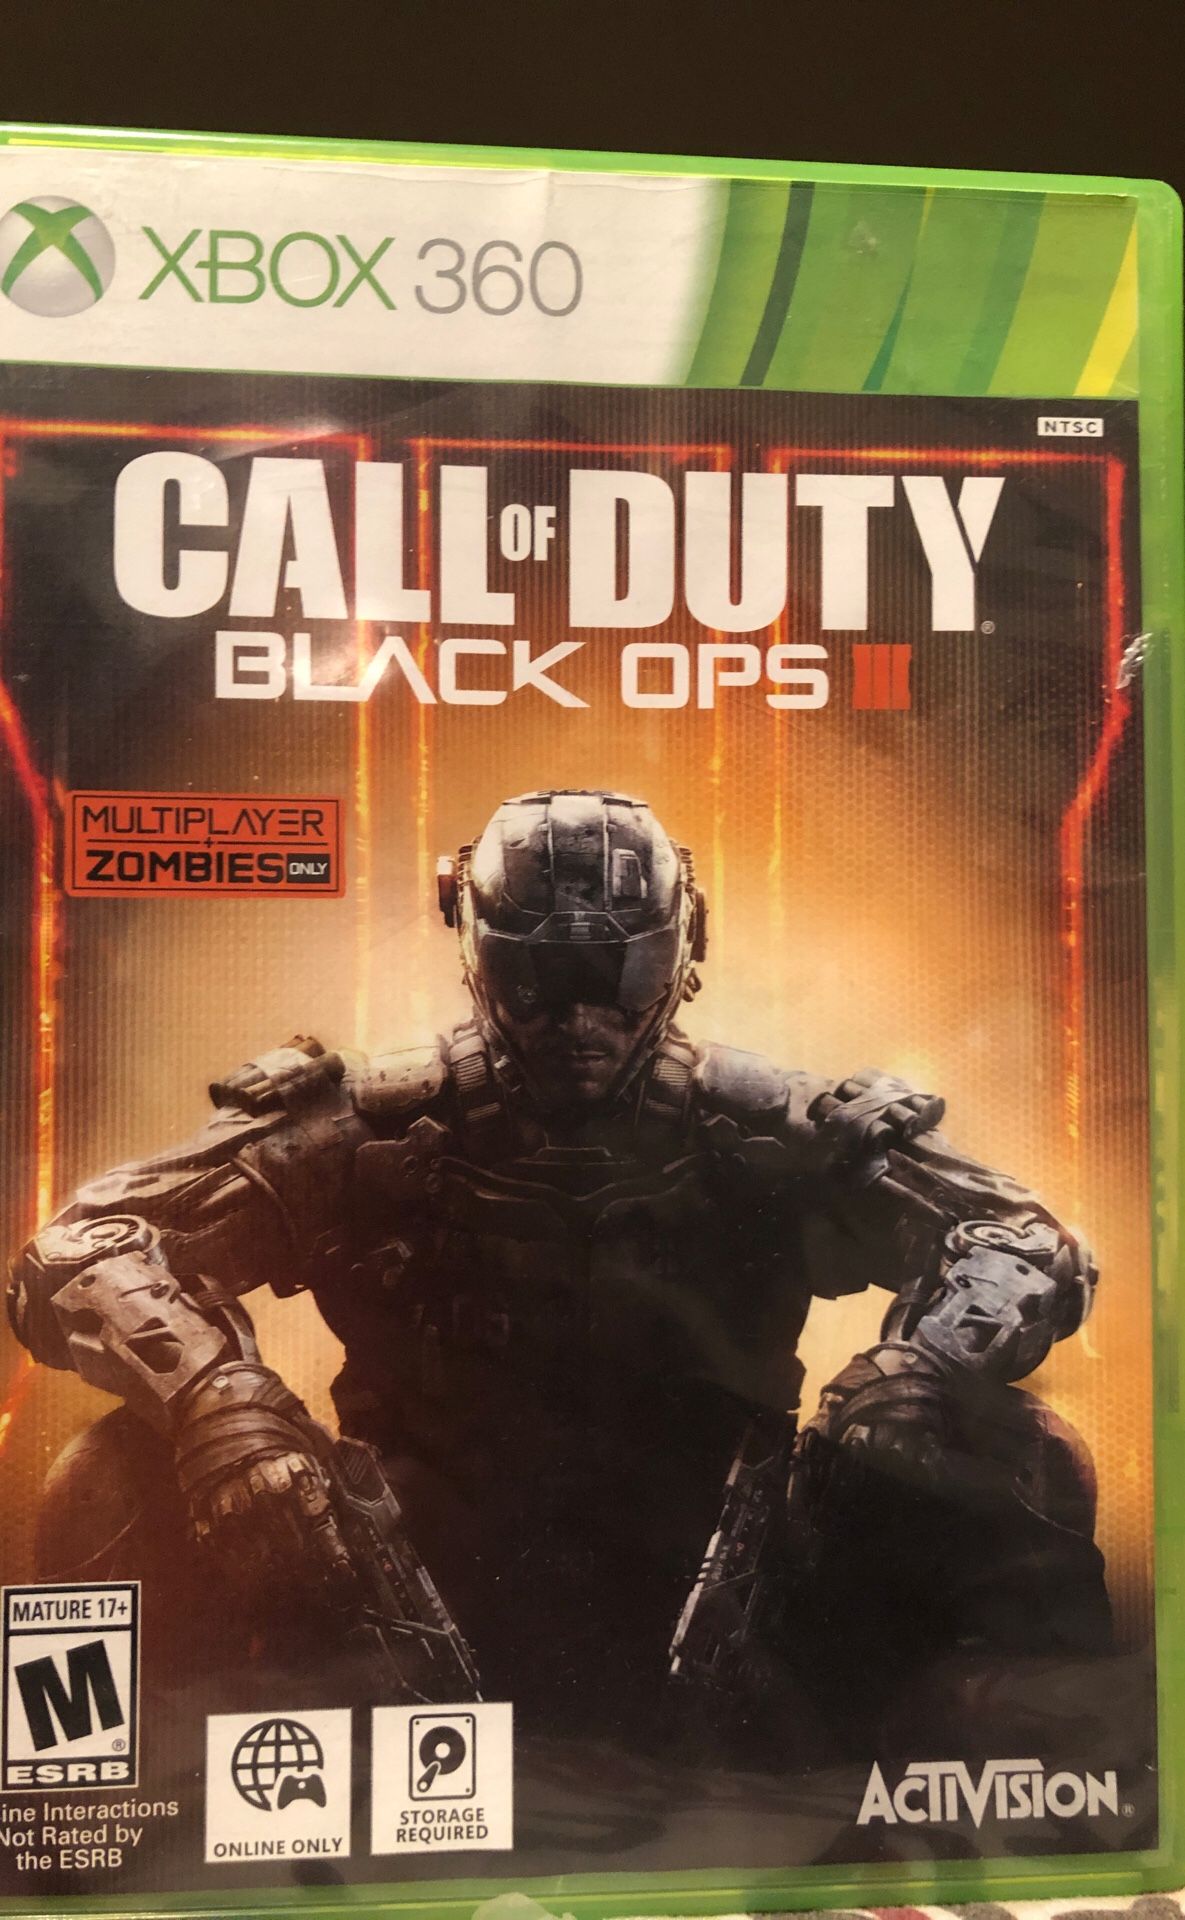 Call of duty black ops 3 (Xbox 360)